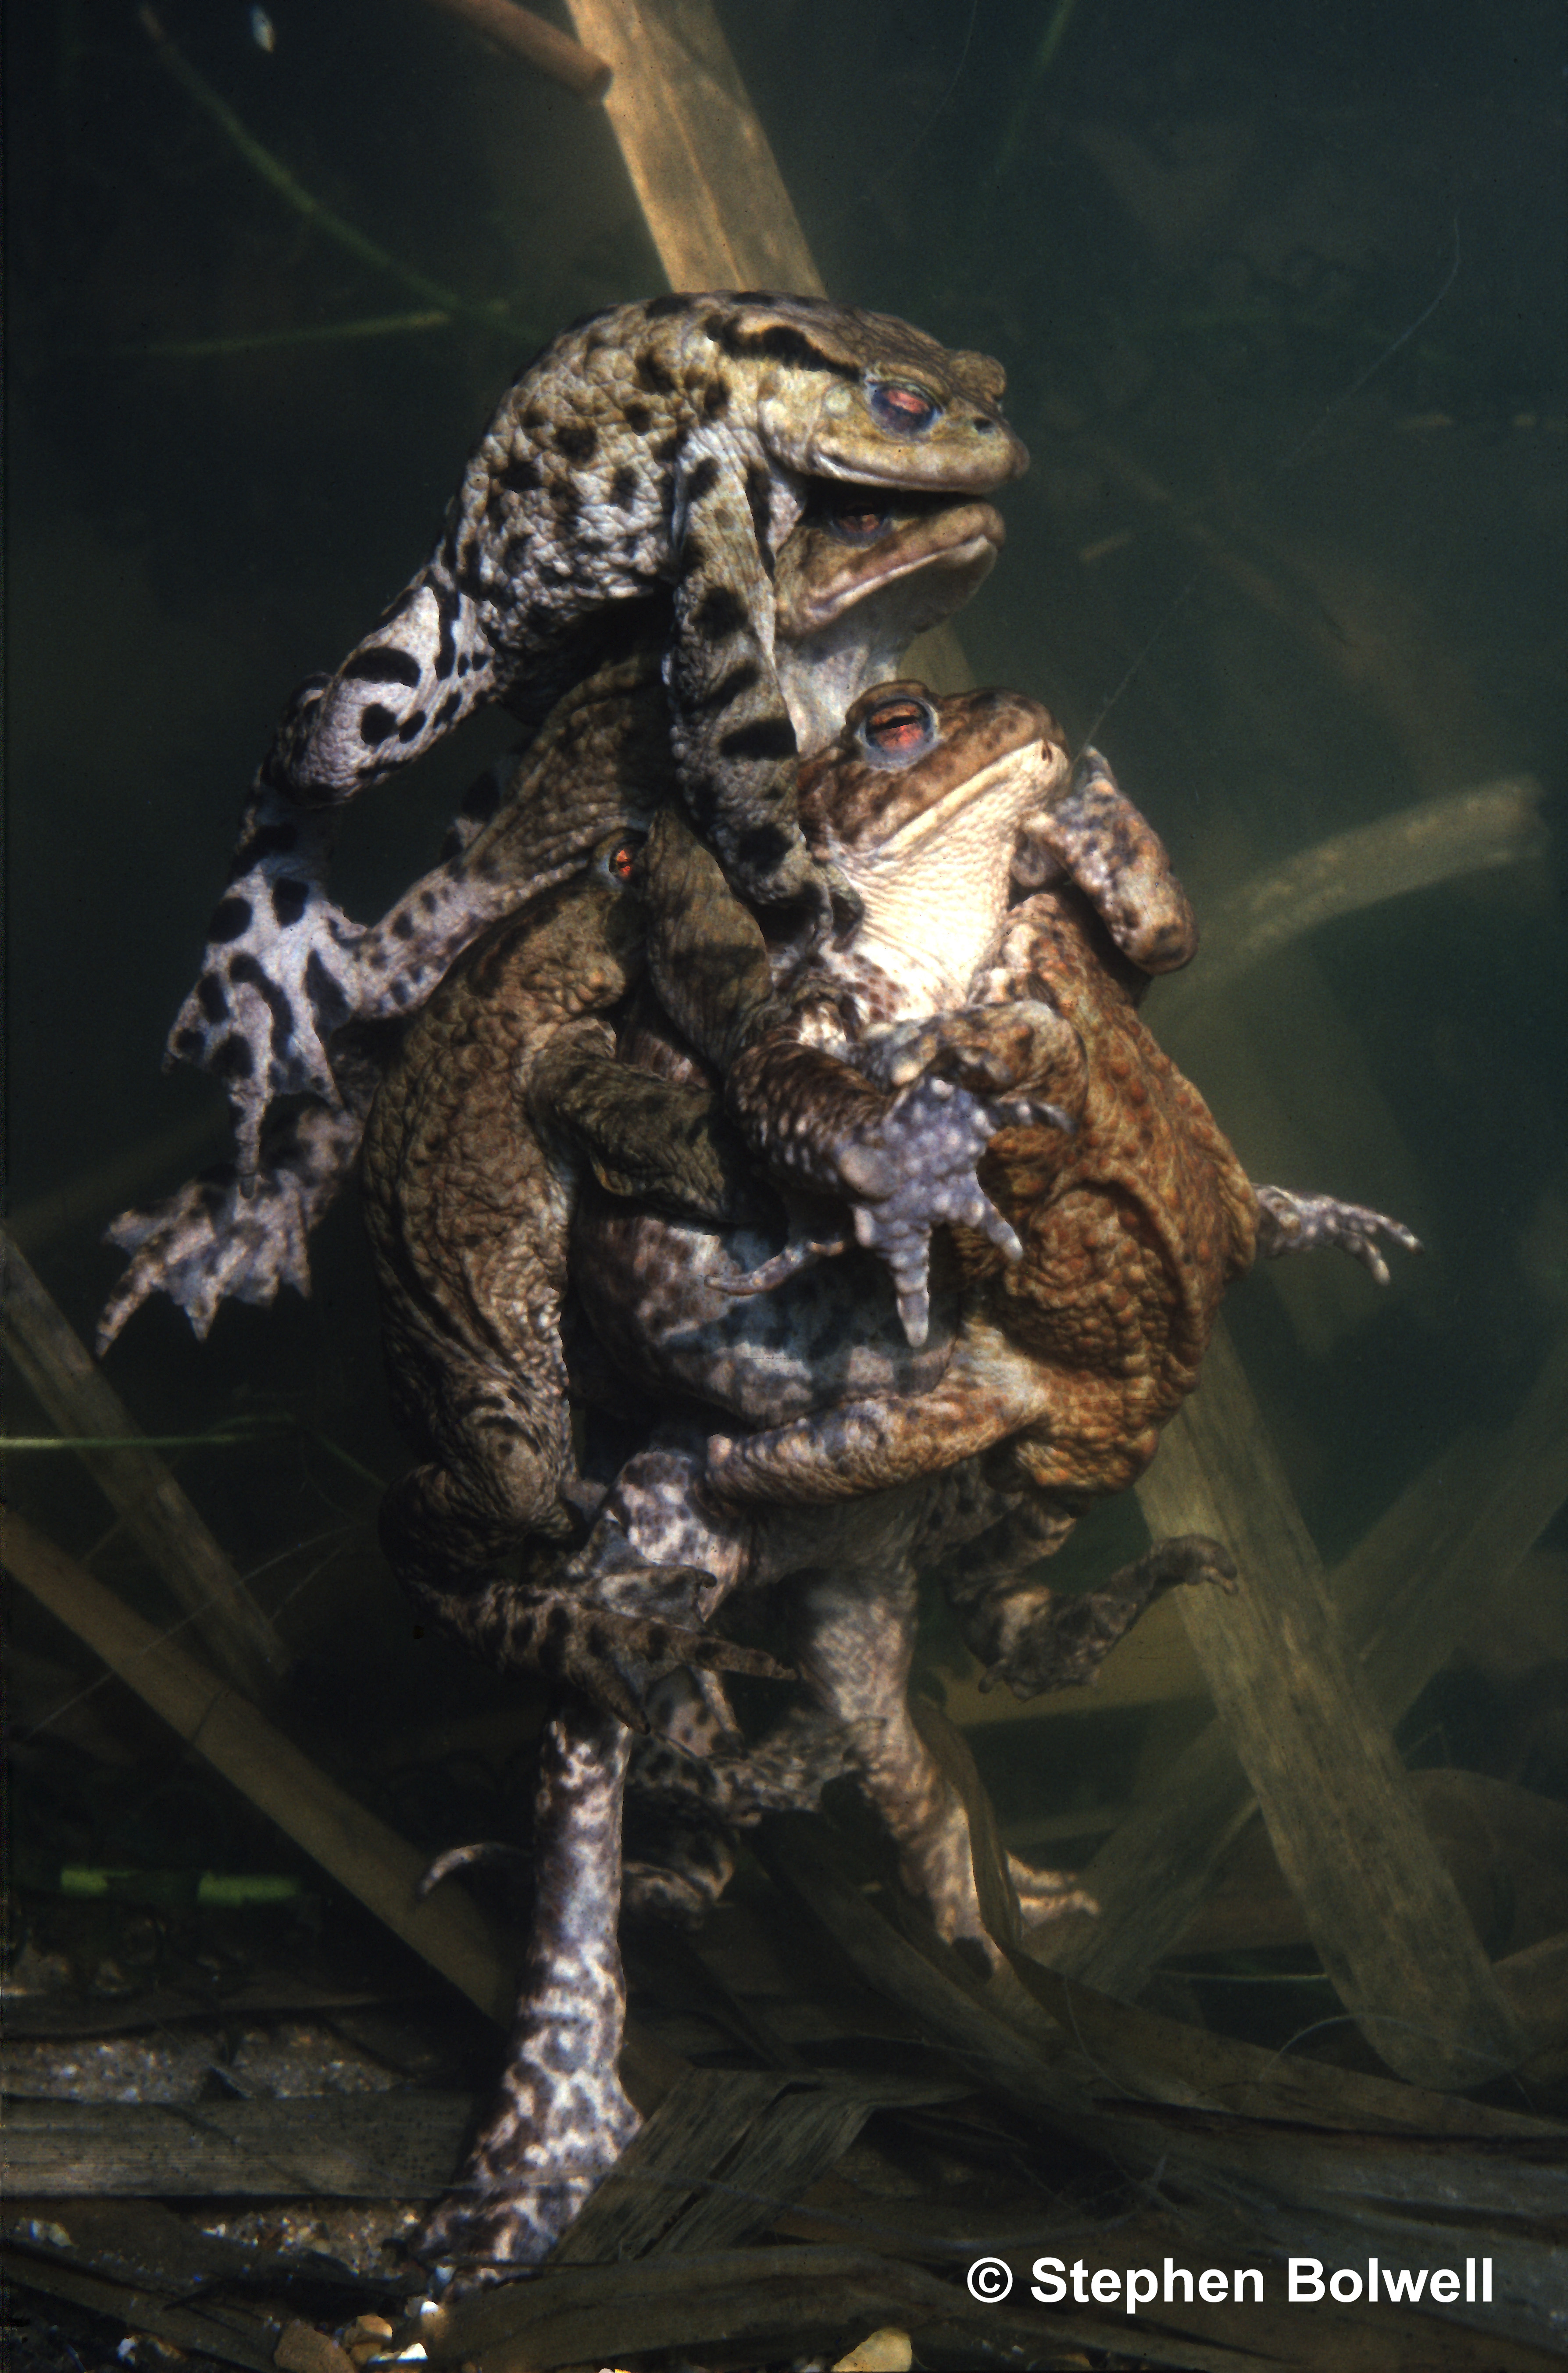 Amplexus describes the actio of a male frog or toad grasping a female during spawning, but with toads this can get out of hand.